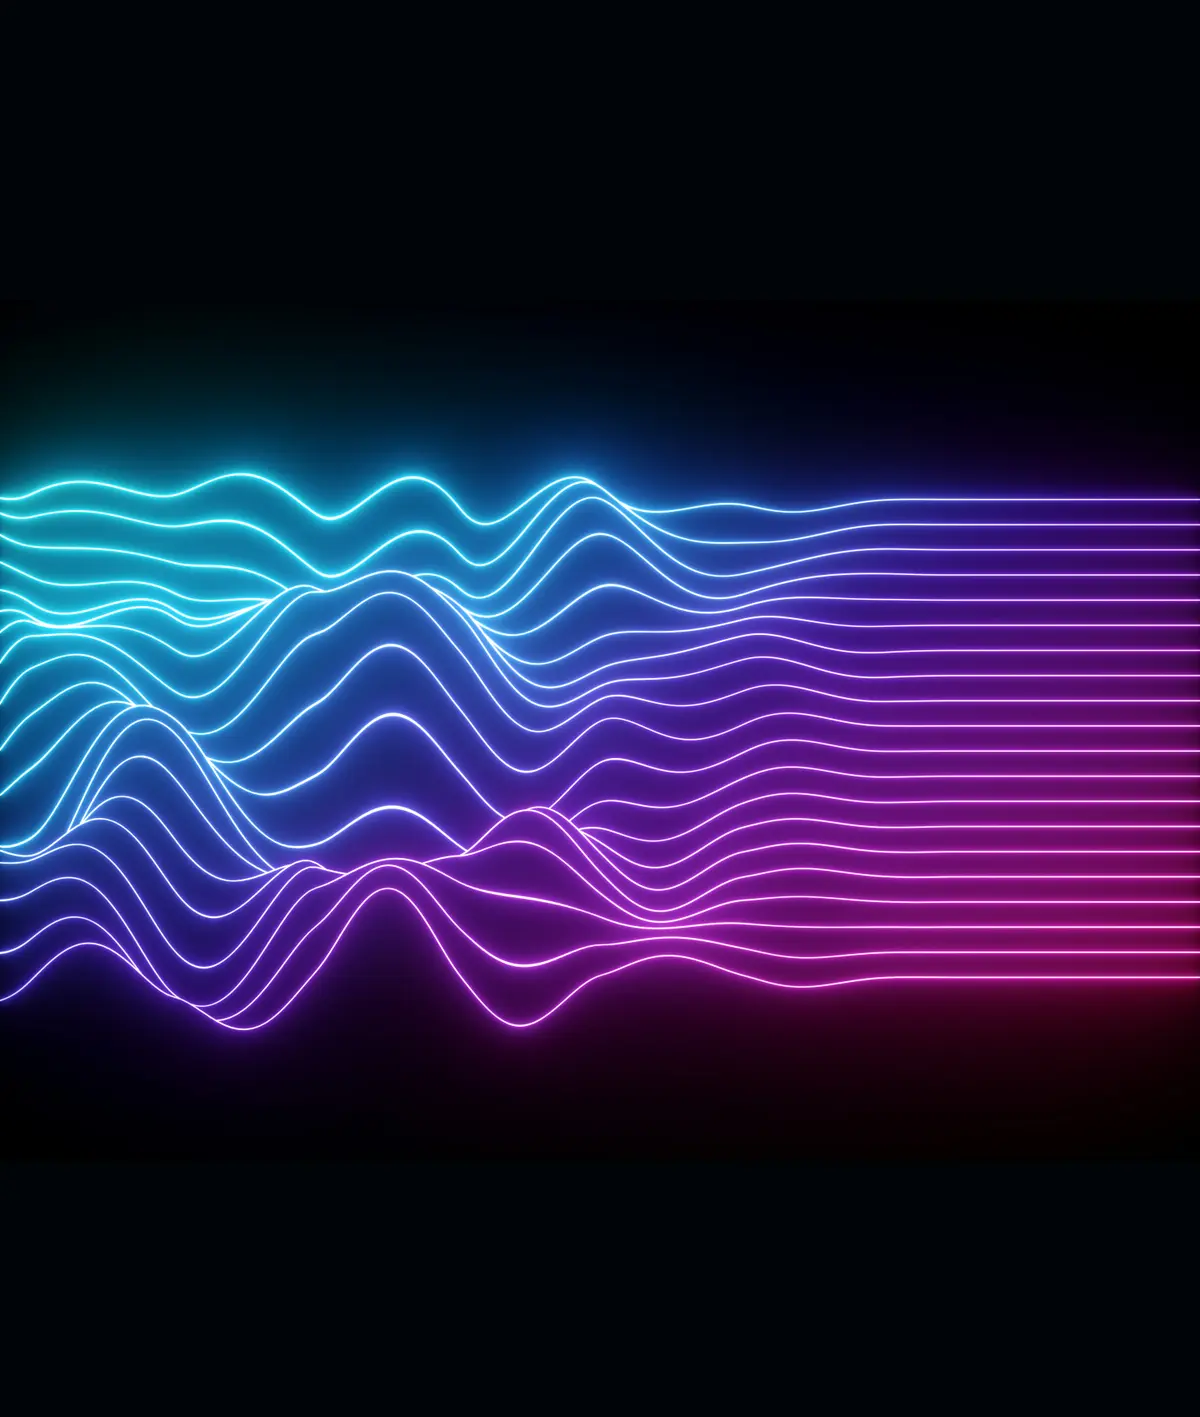 Sound waves HIGH RES 1